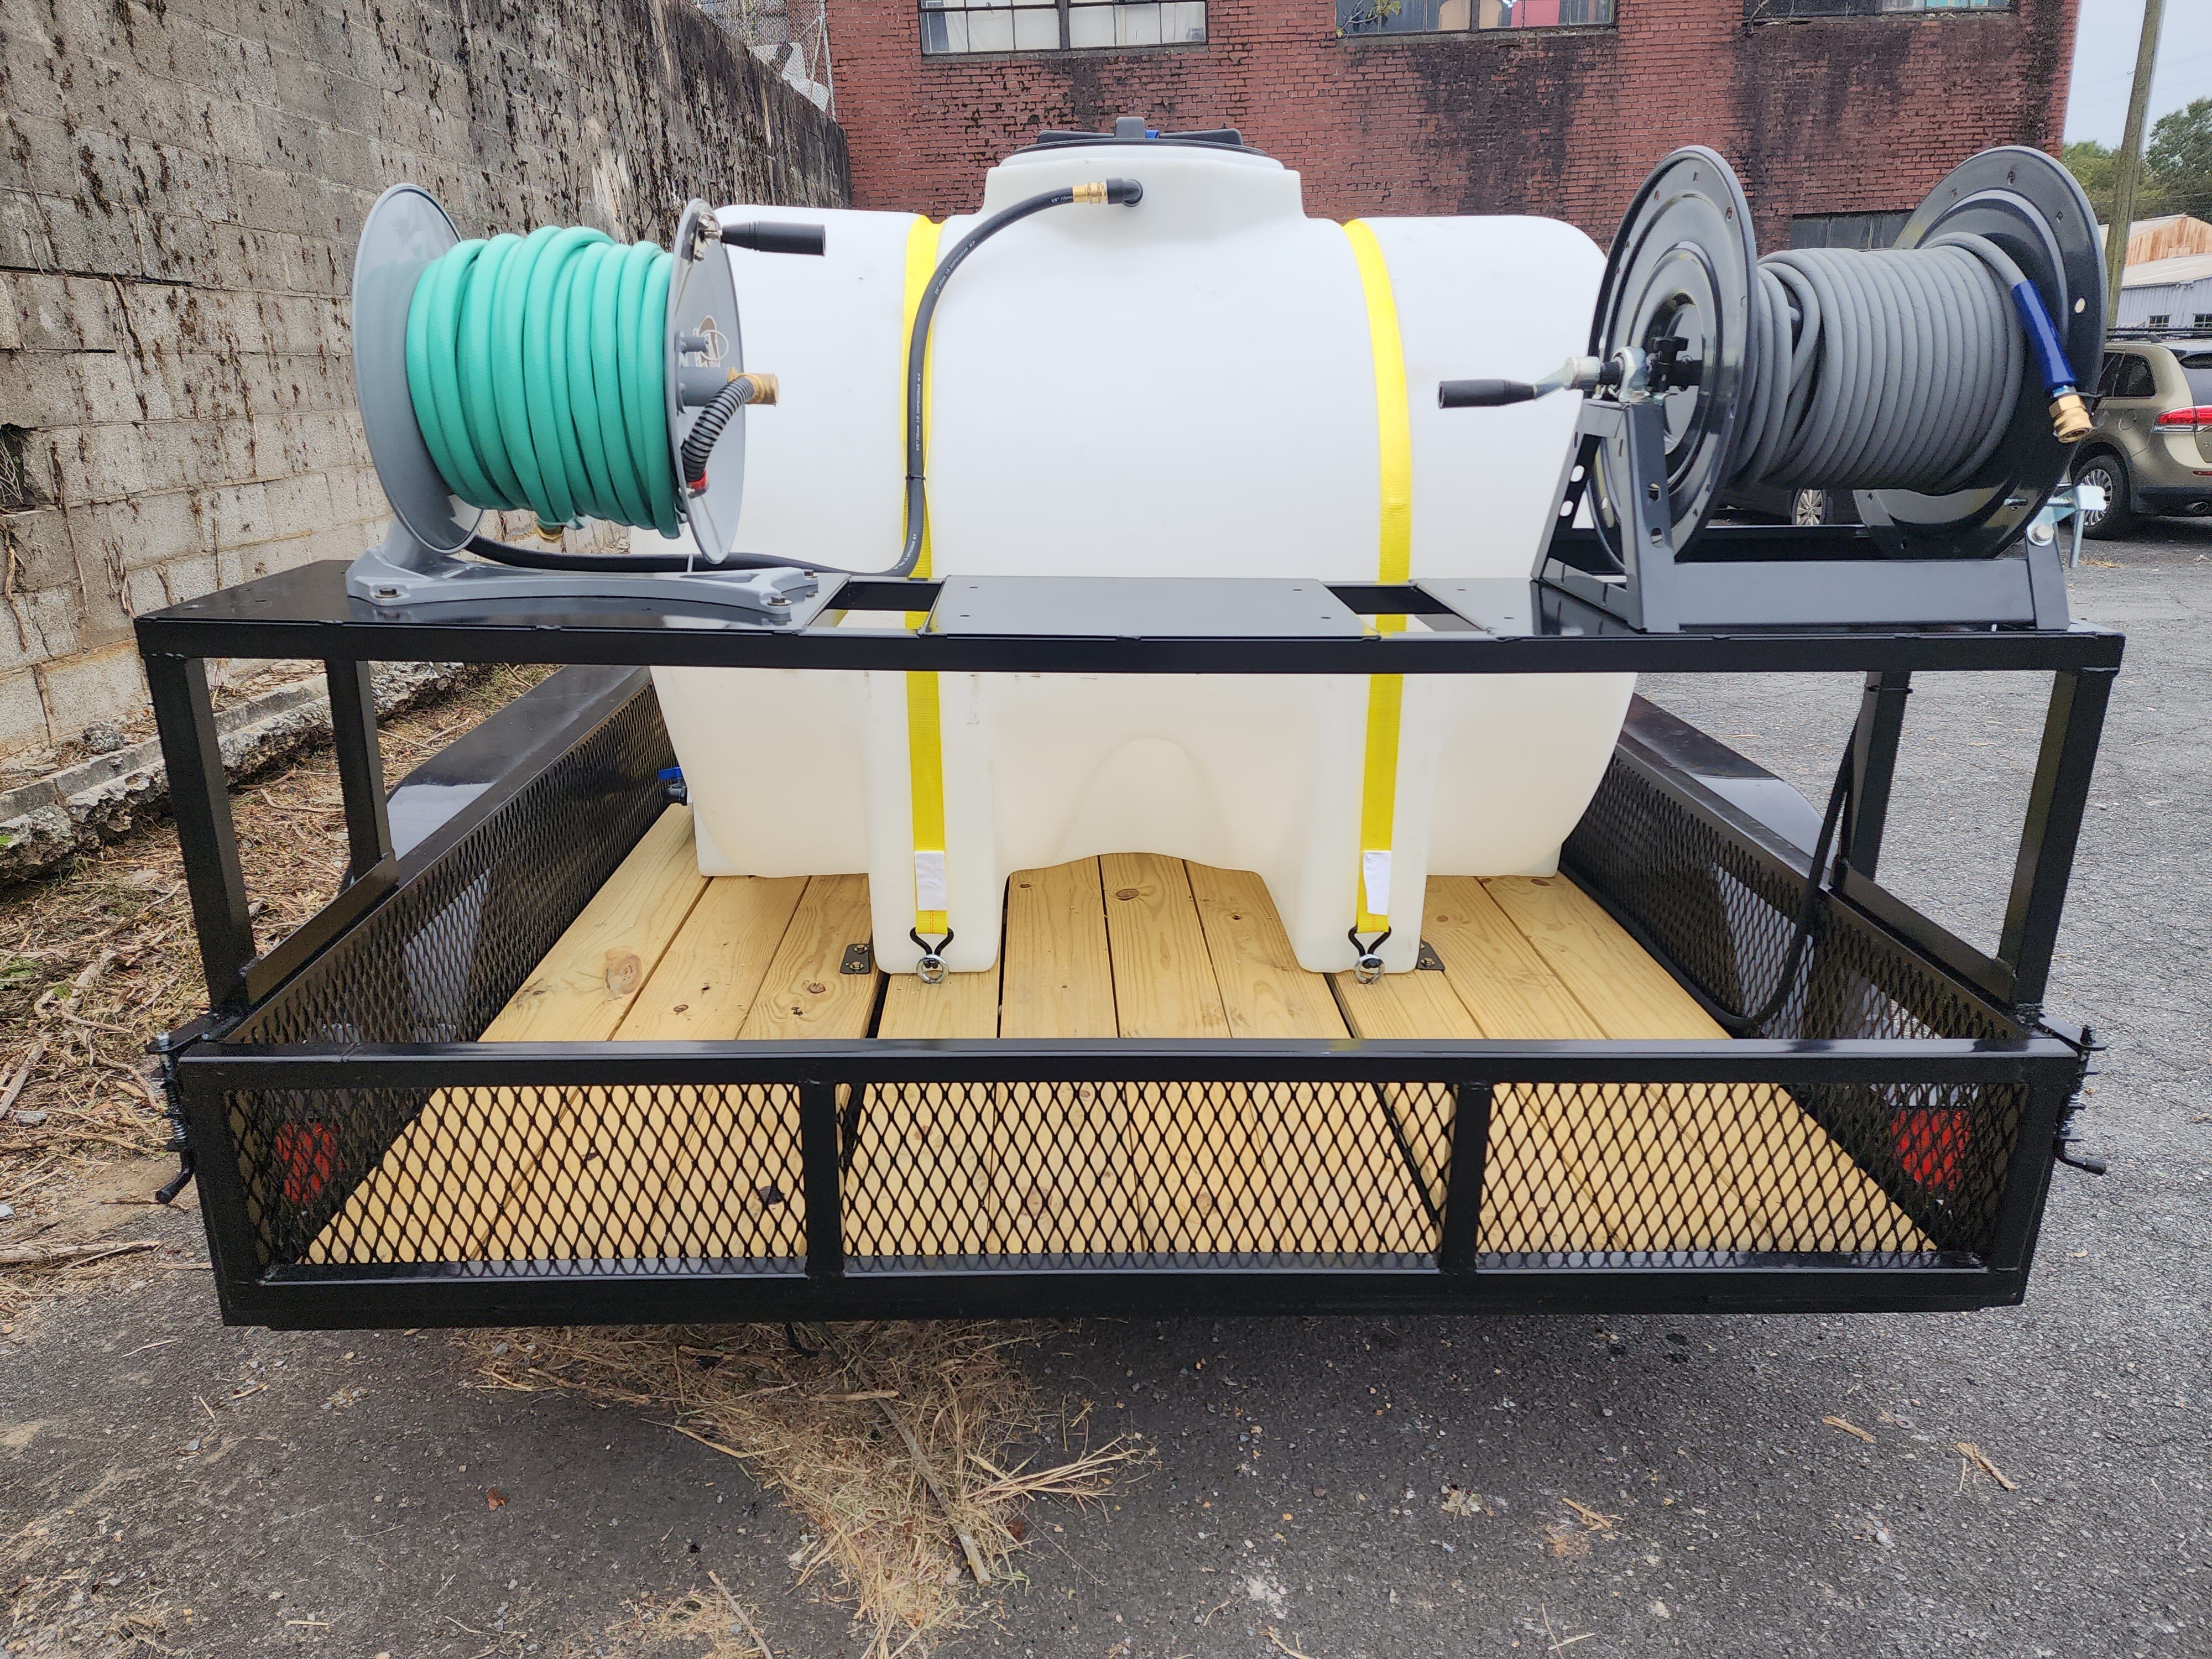 Hydro Max 10gpm at 3000psi Hot Water Trailer Package-SS Unit Pressure Washer Trailer Package BCE Cleaning Systems 